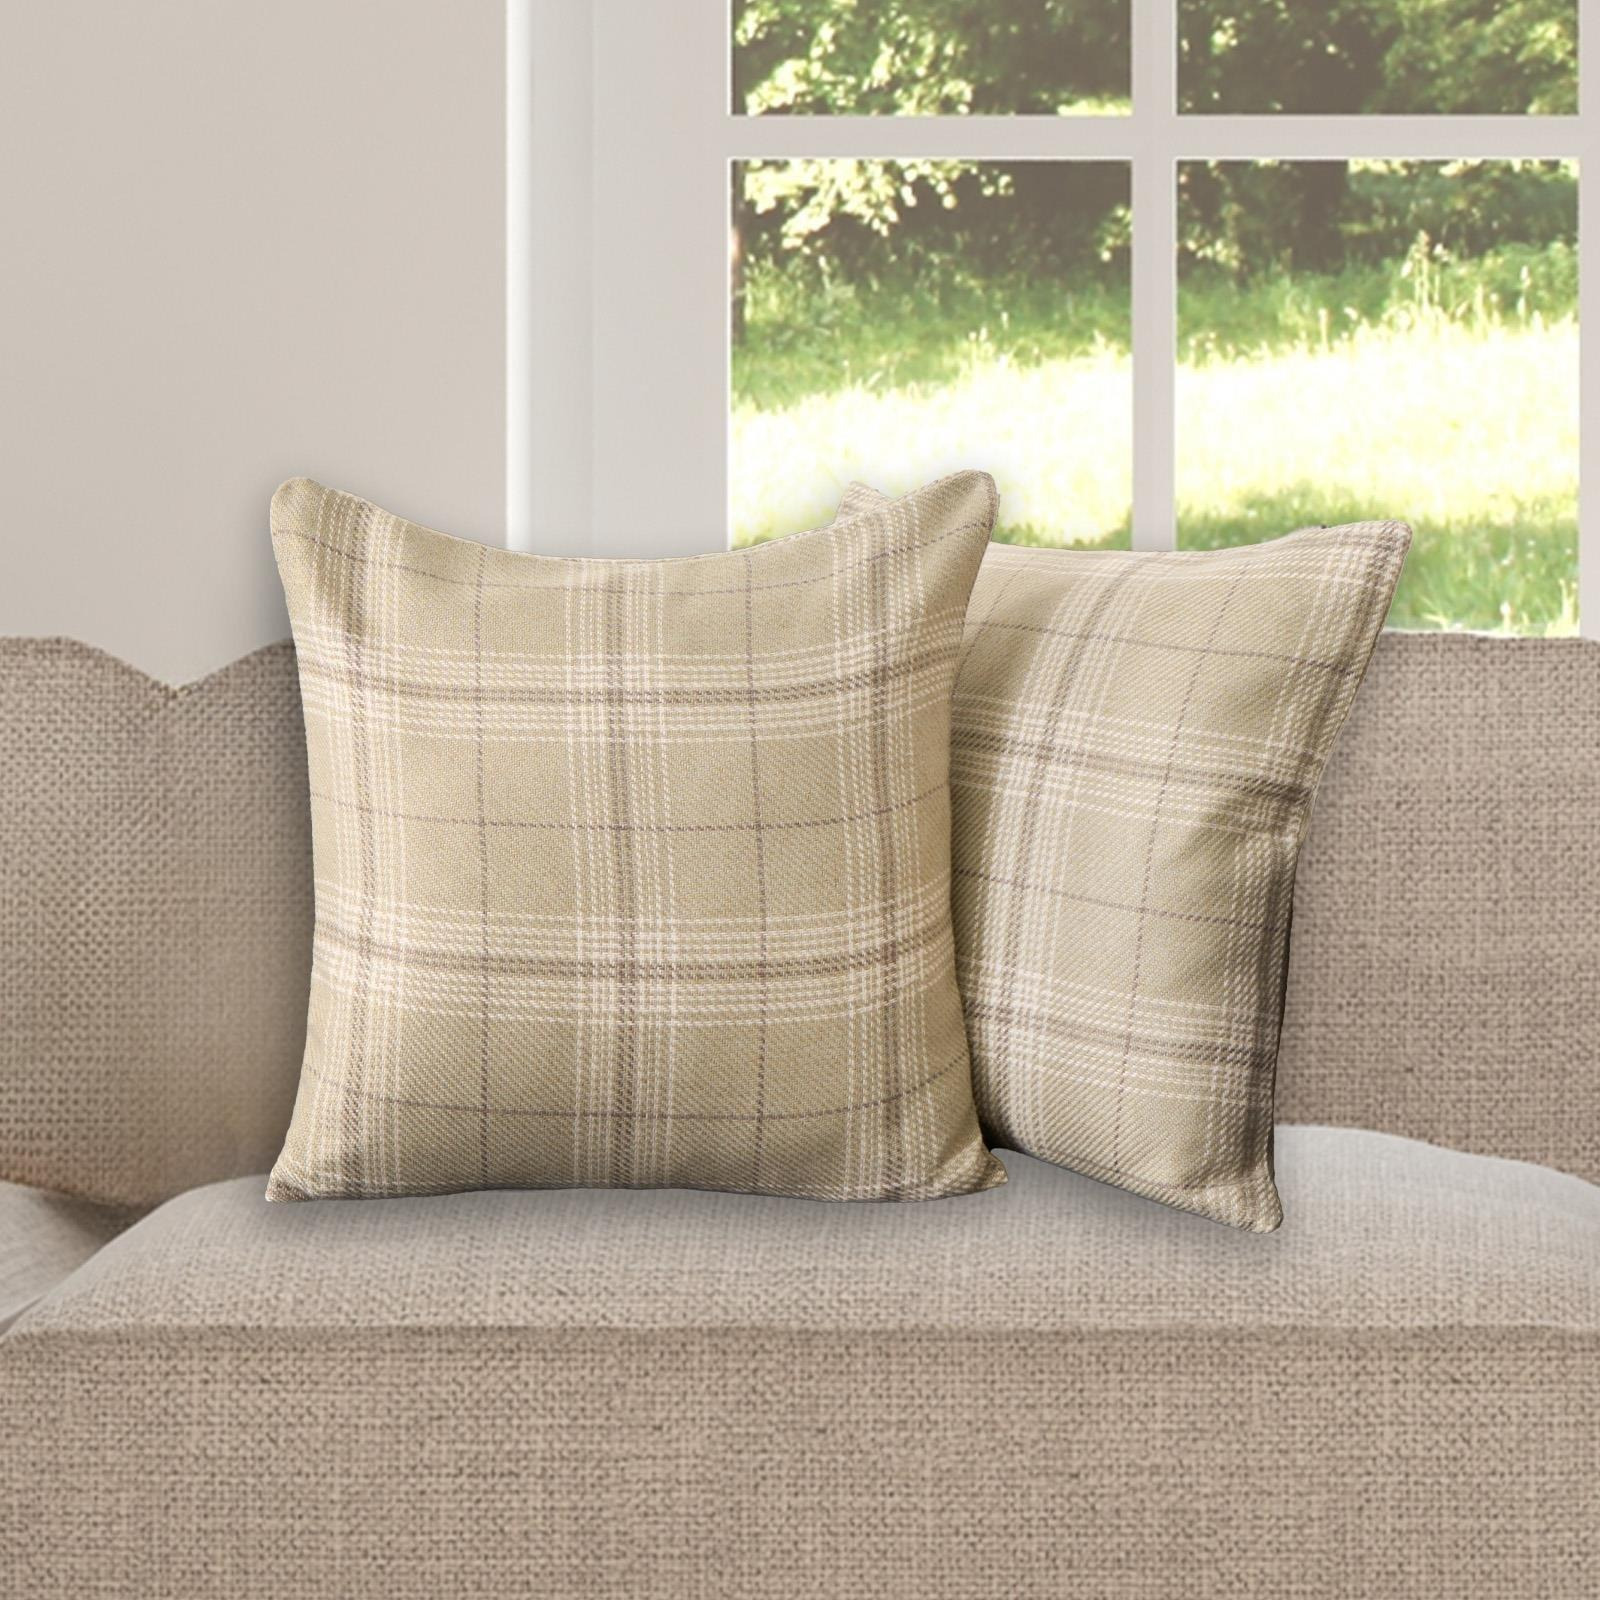 4 Pack Woven Check Cushion Covers Printed Soft - image 1